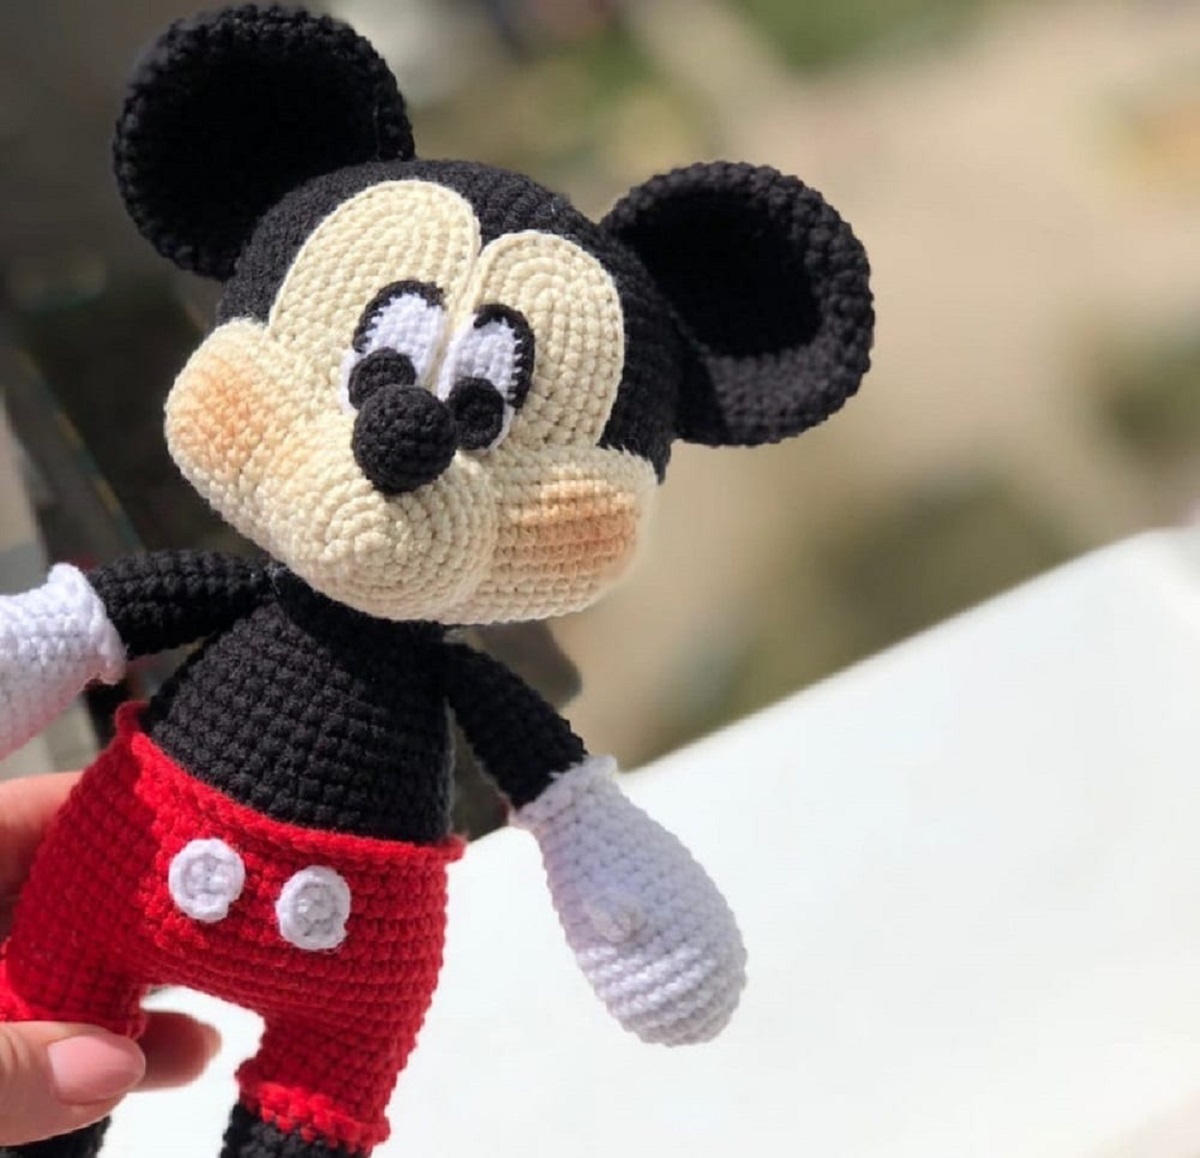 Crochet stuffed Mickey Mouse toy wearing red shorts with two shite circles being held by one hand.